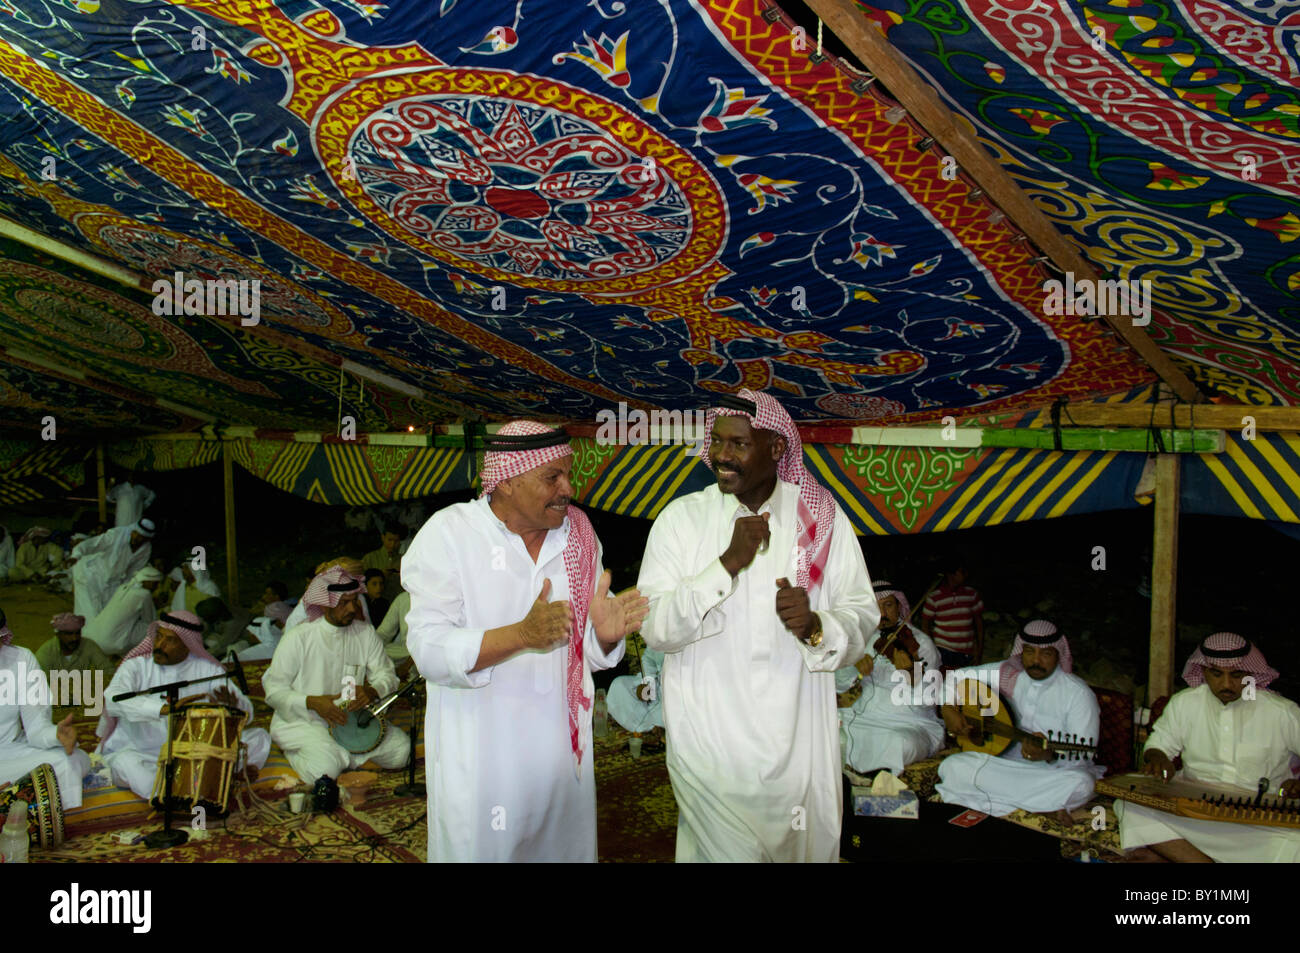 Guests celebrate with dance during a traditional Bedouin wedding celebration. El Tur, Sinai Peninsula, Egypt Stock Photo